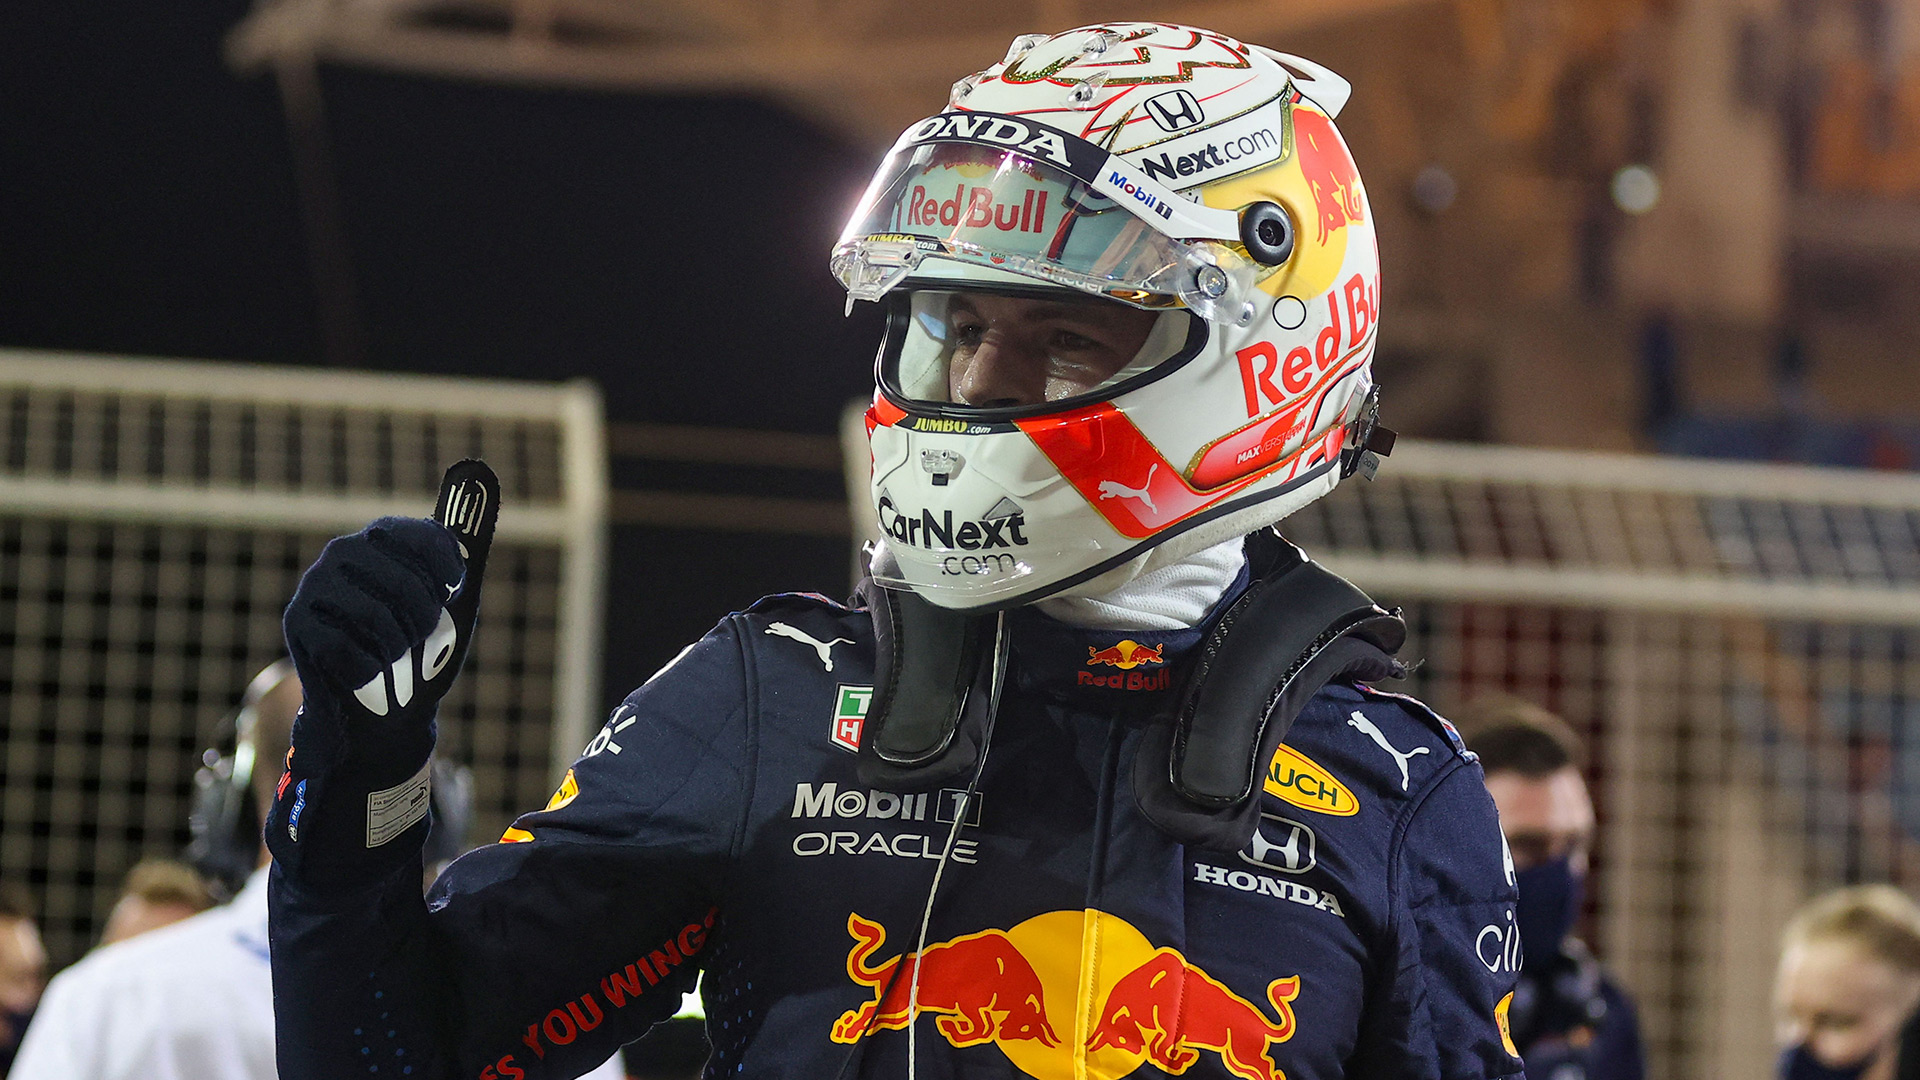 2021 Bahrain Grand Prix report and highlights: Max Verstappen takes pole for 2021 season opener after outpacing Mercedes in Bahrain